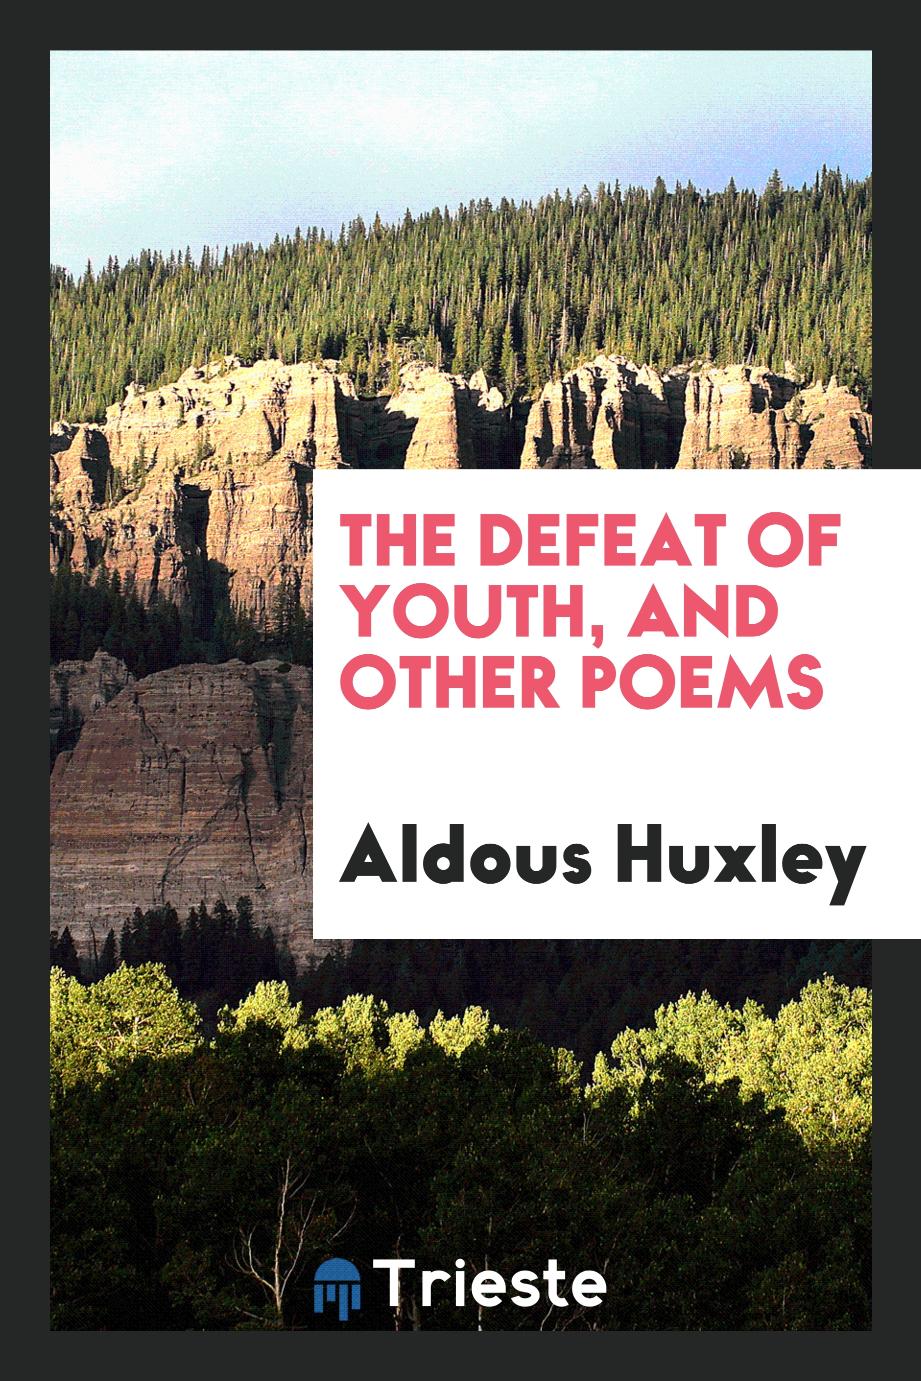 The defeat of youth, and other poems